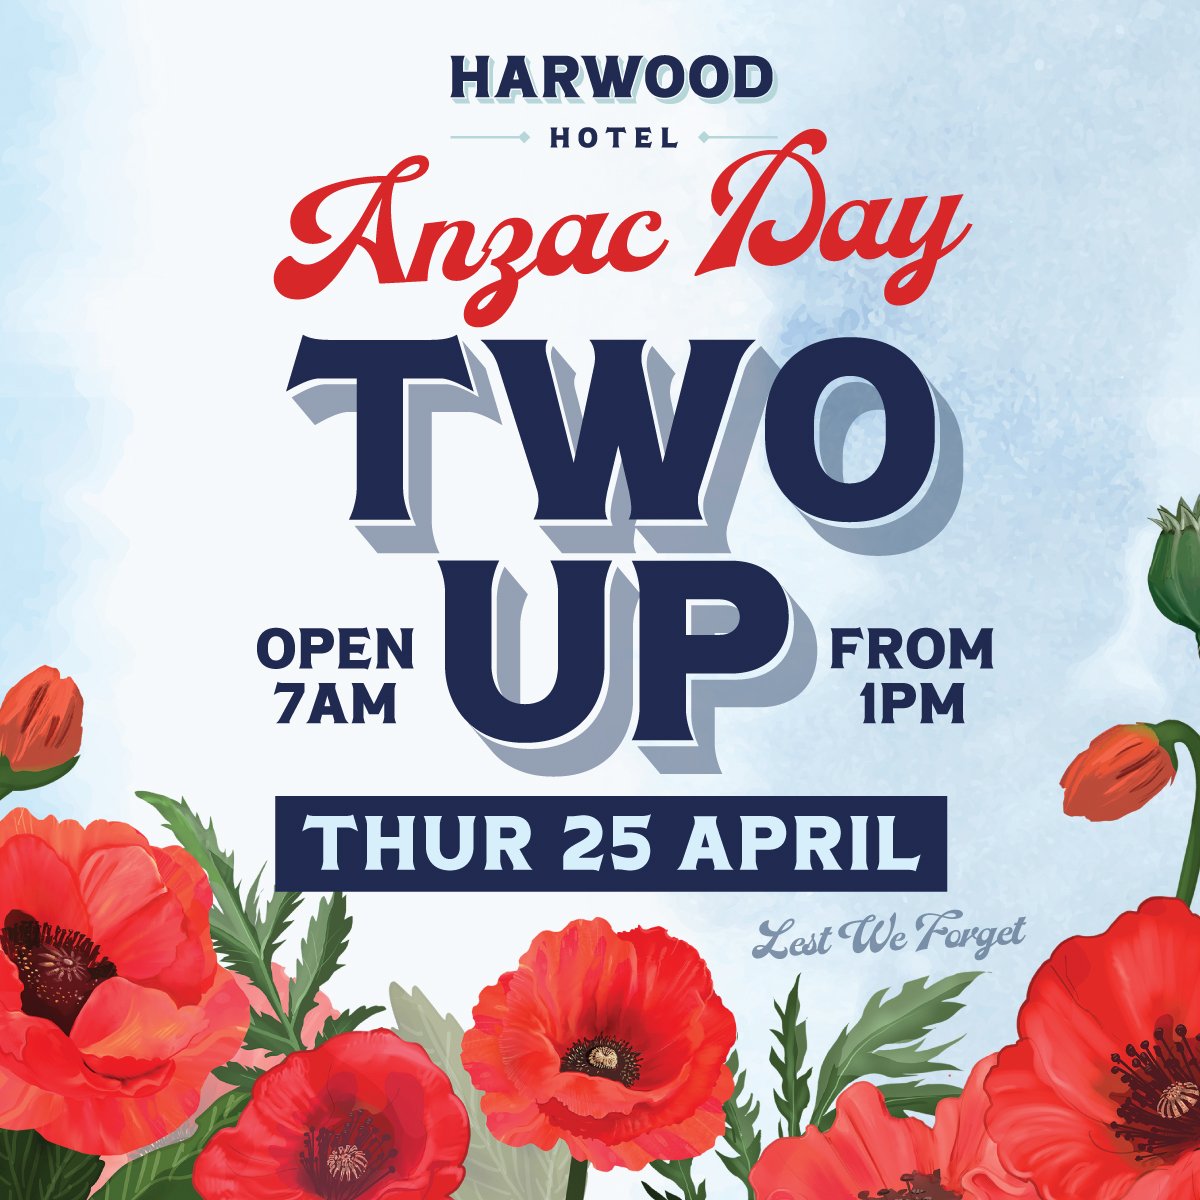 Commend the ANZAC spirit with us at Harwood Hotel this ANZAC Day!

From 7am, join in the solemnity and respect, then experience the excitement of 2-Up from 1pm.

Let's honour our heroes together in a day filled with remembrance and camaraderie.

Make